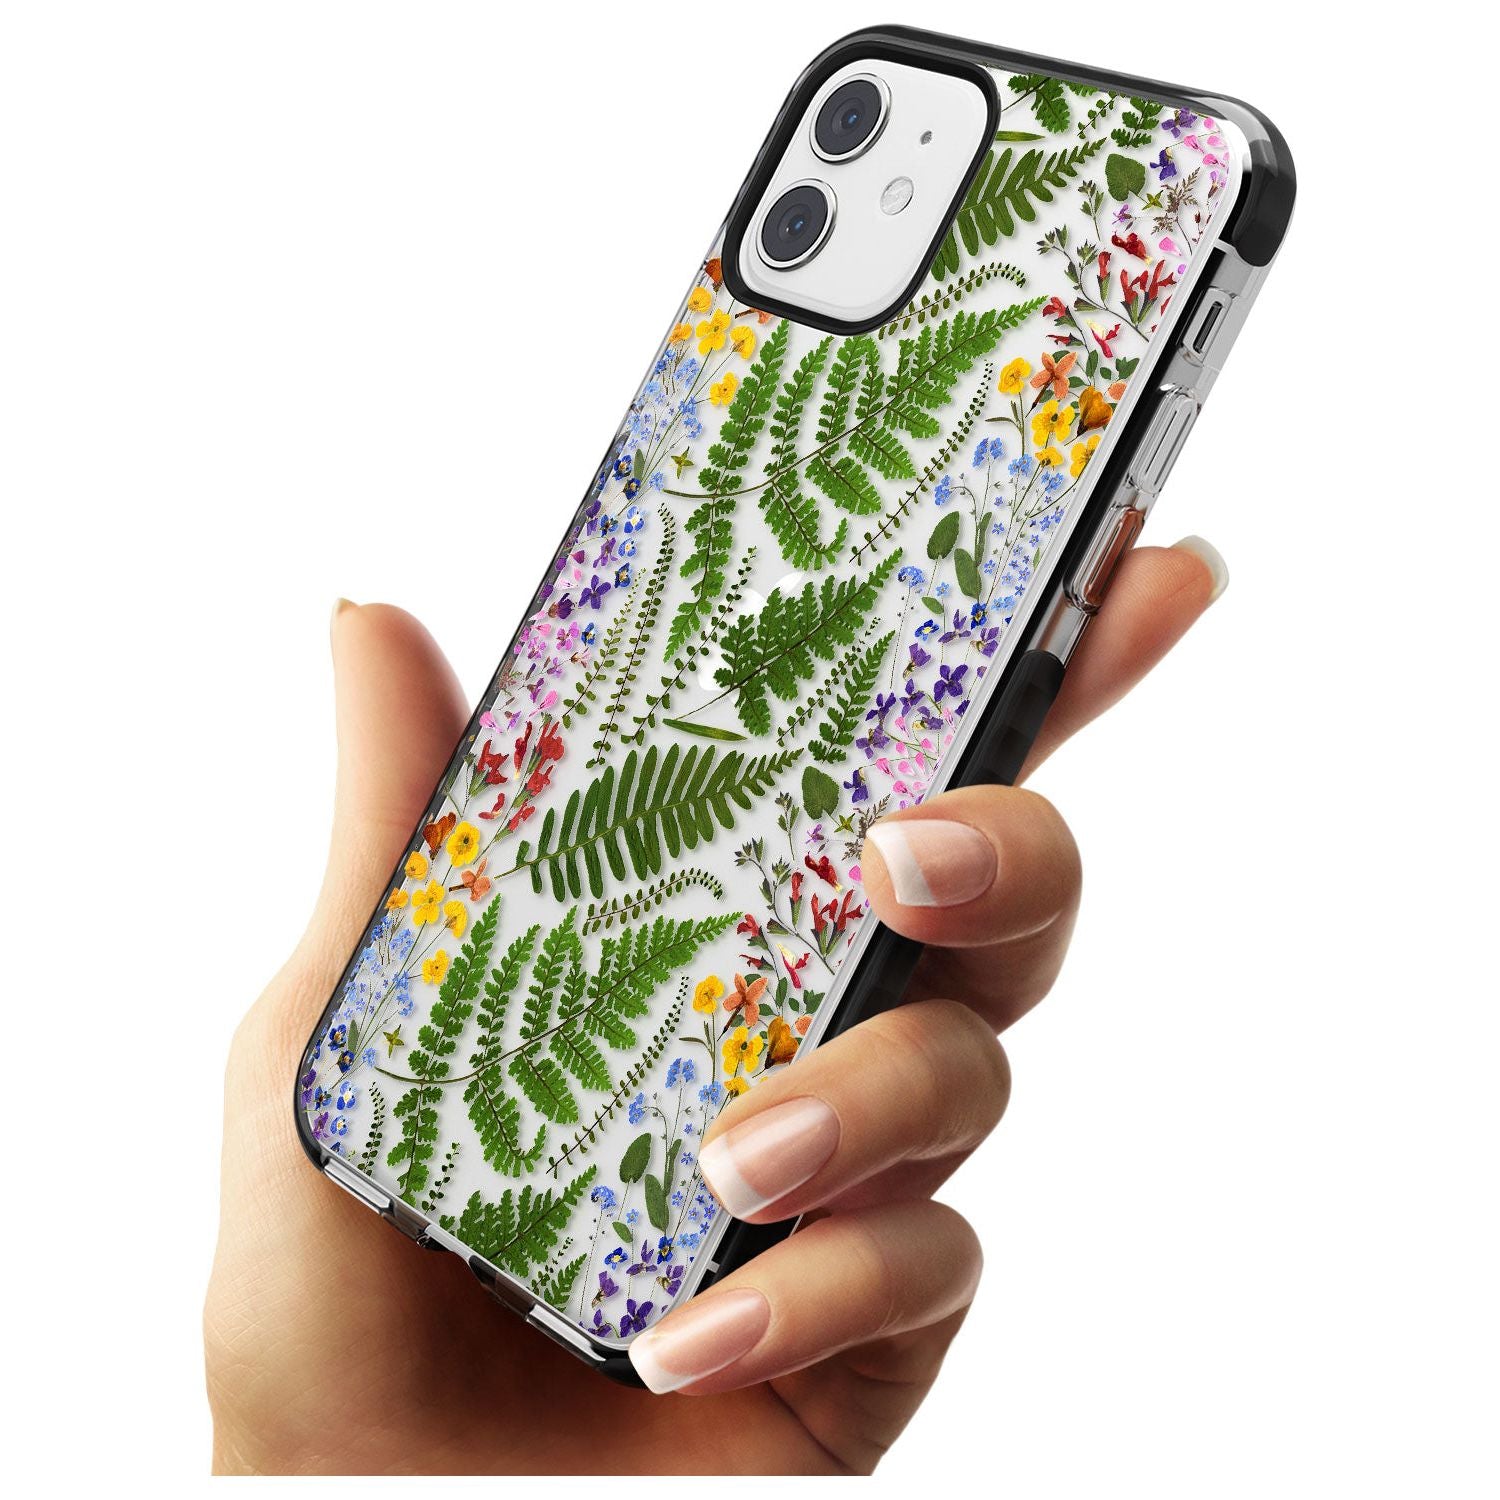 Busy Floral and Fern Design Black Impact Phone Case for iPhone 11